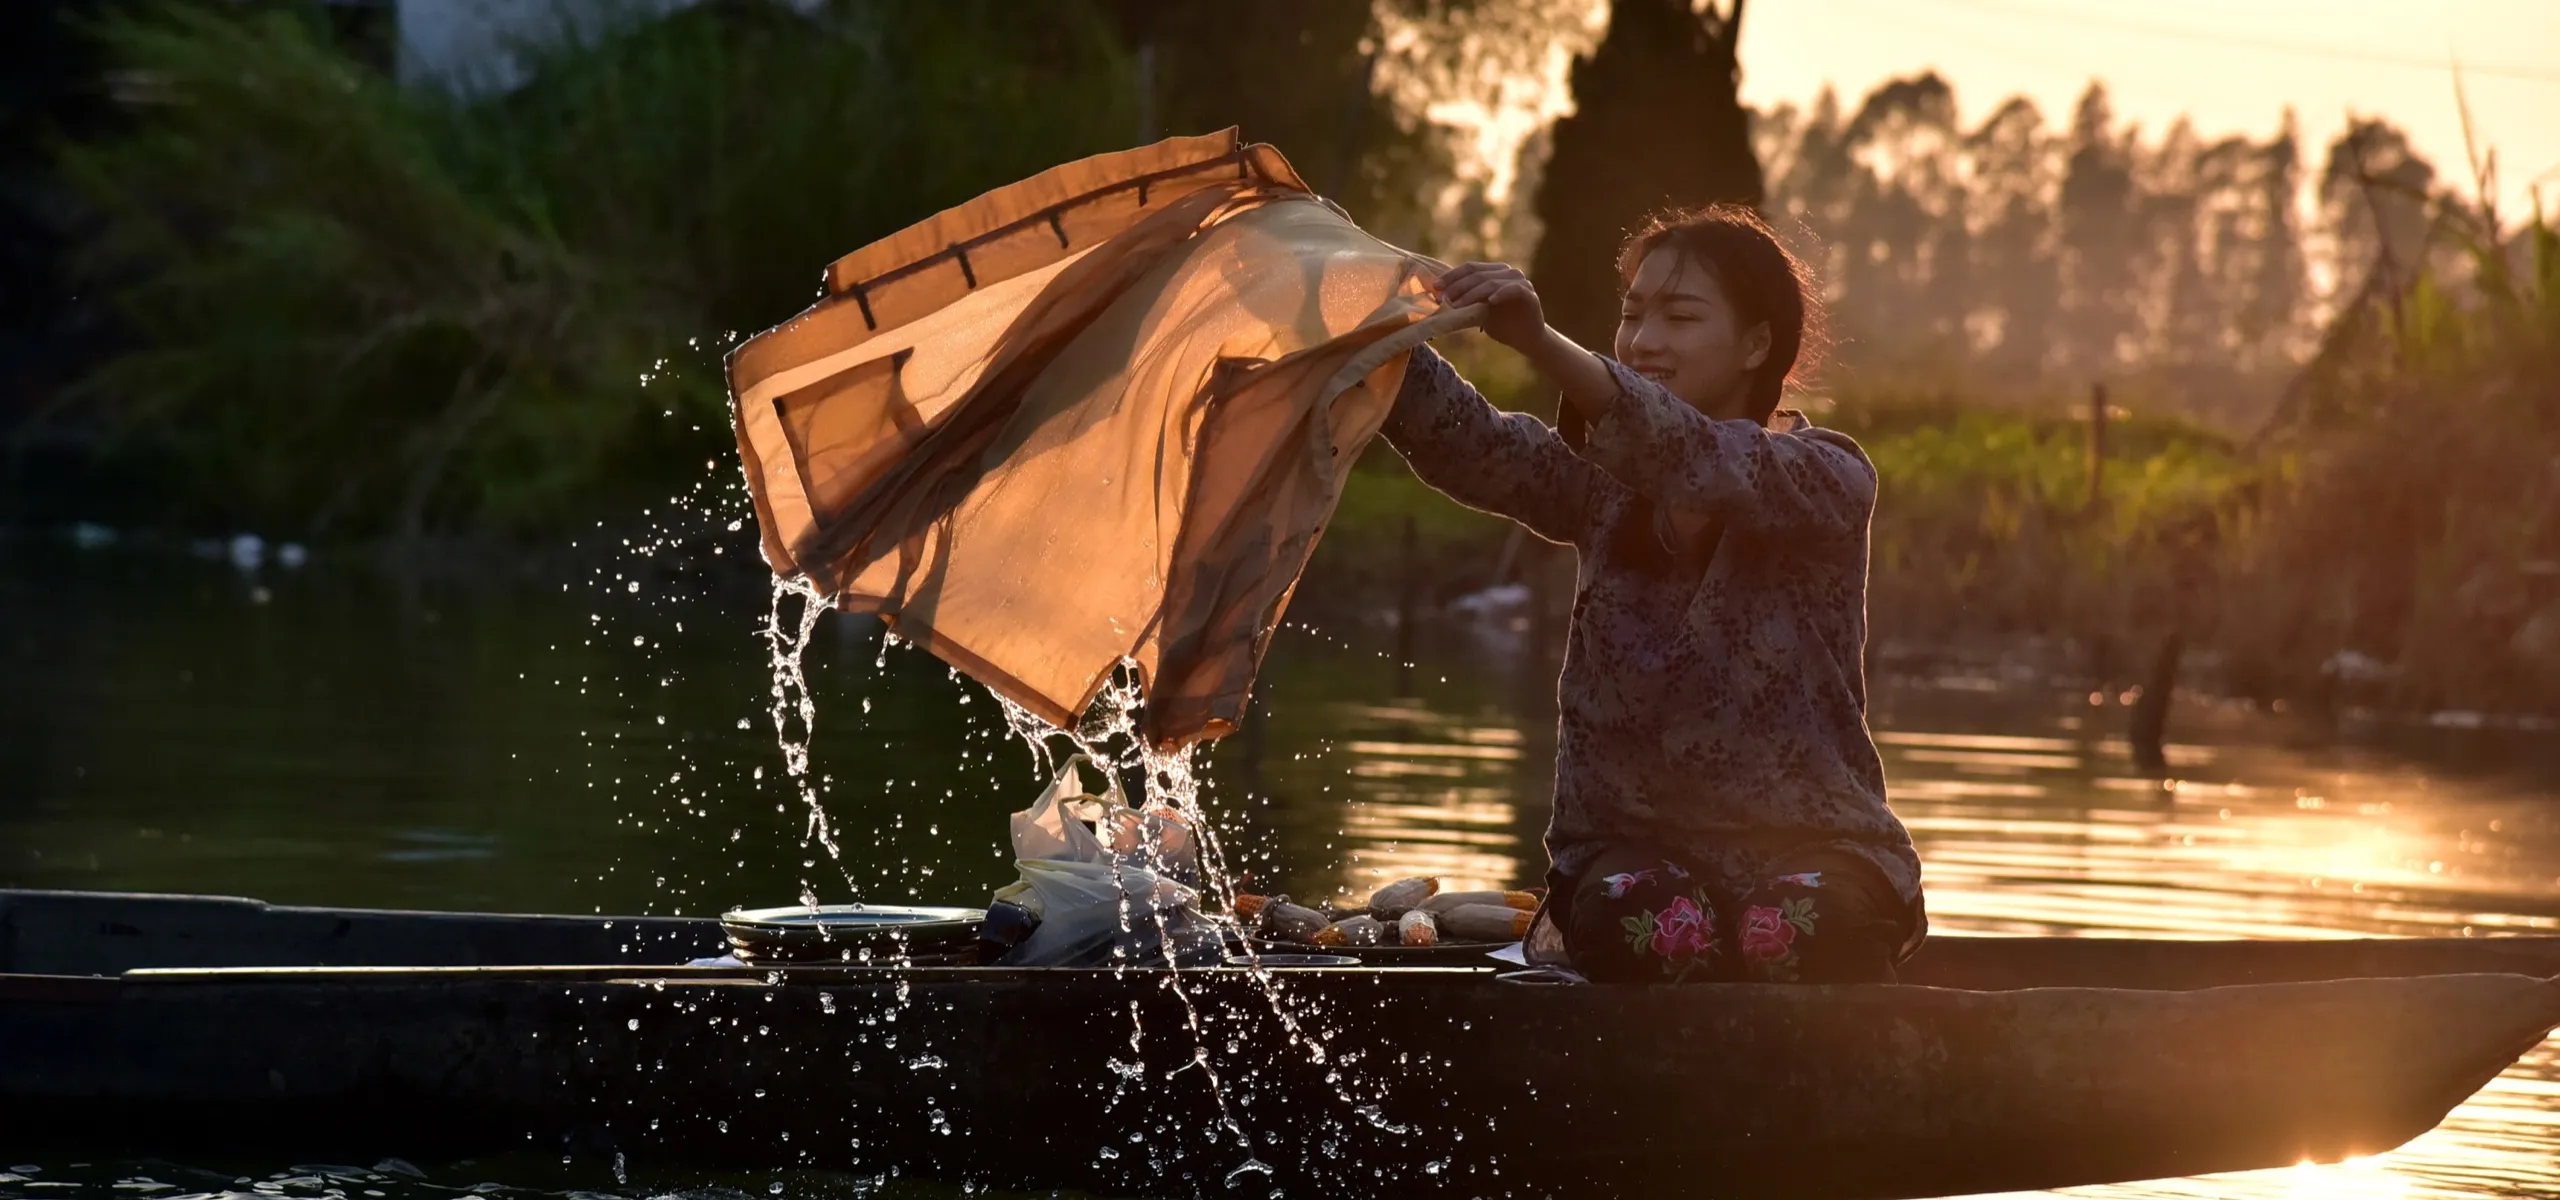 Girl washing clothes in Guangdong